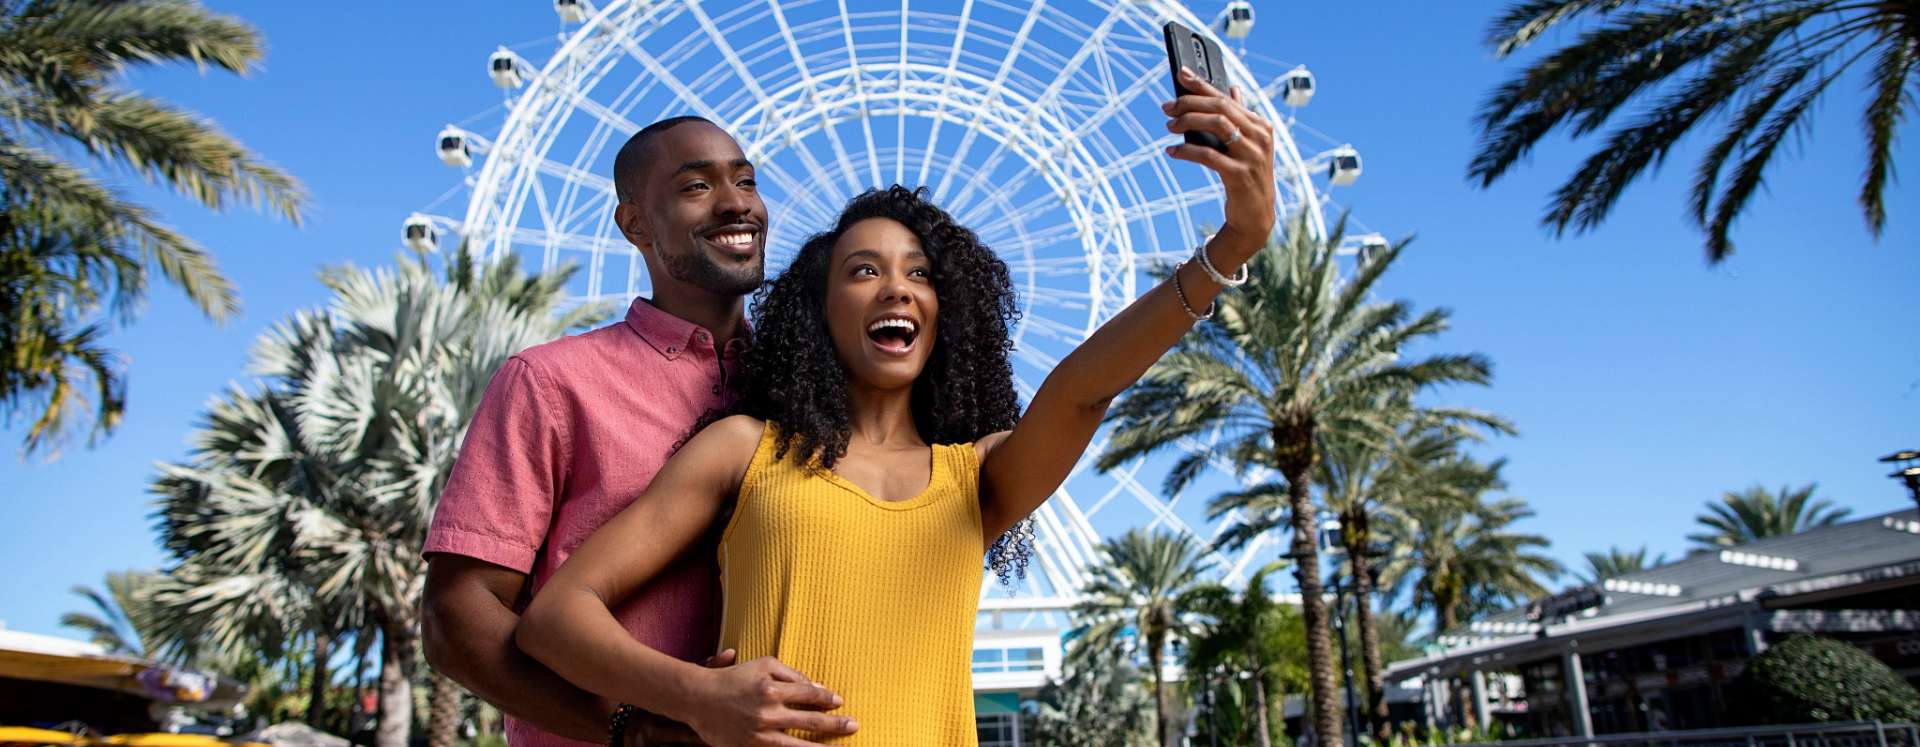 New Orlando attractions for adults are here. Enjoy new entertainment